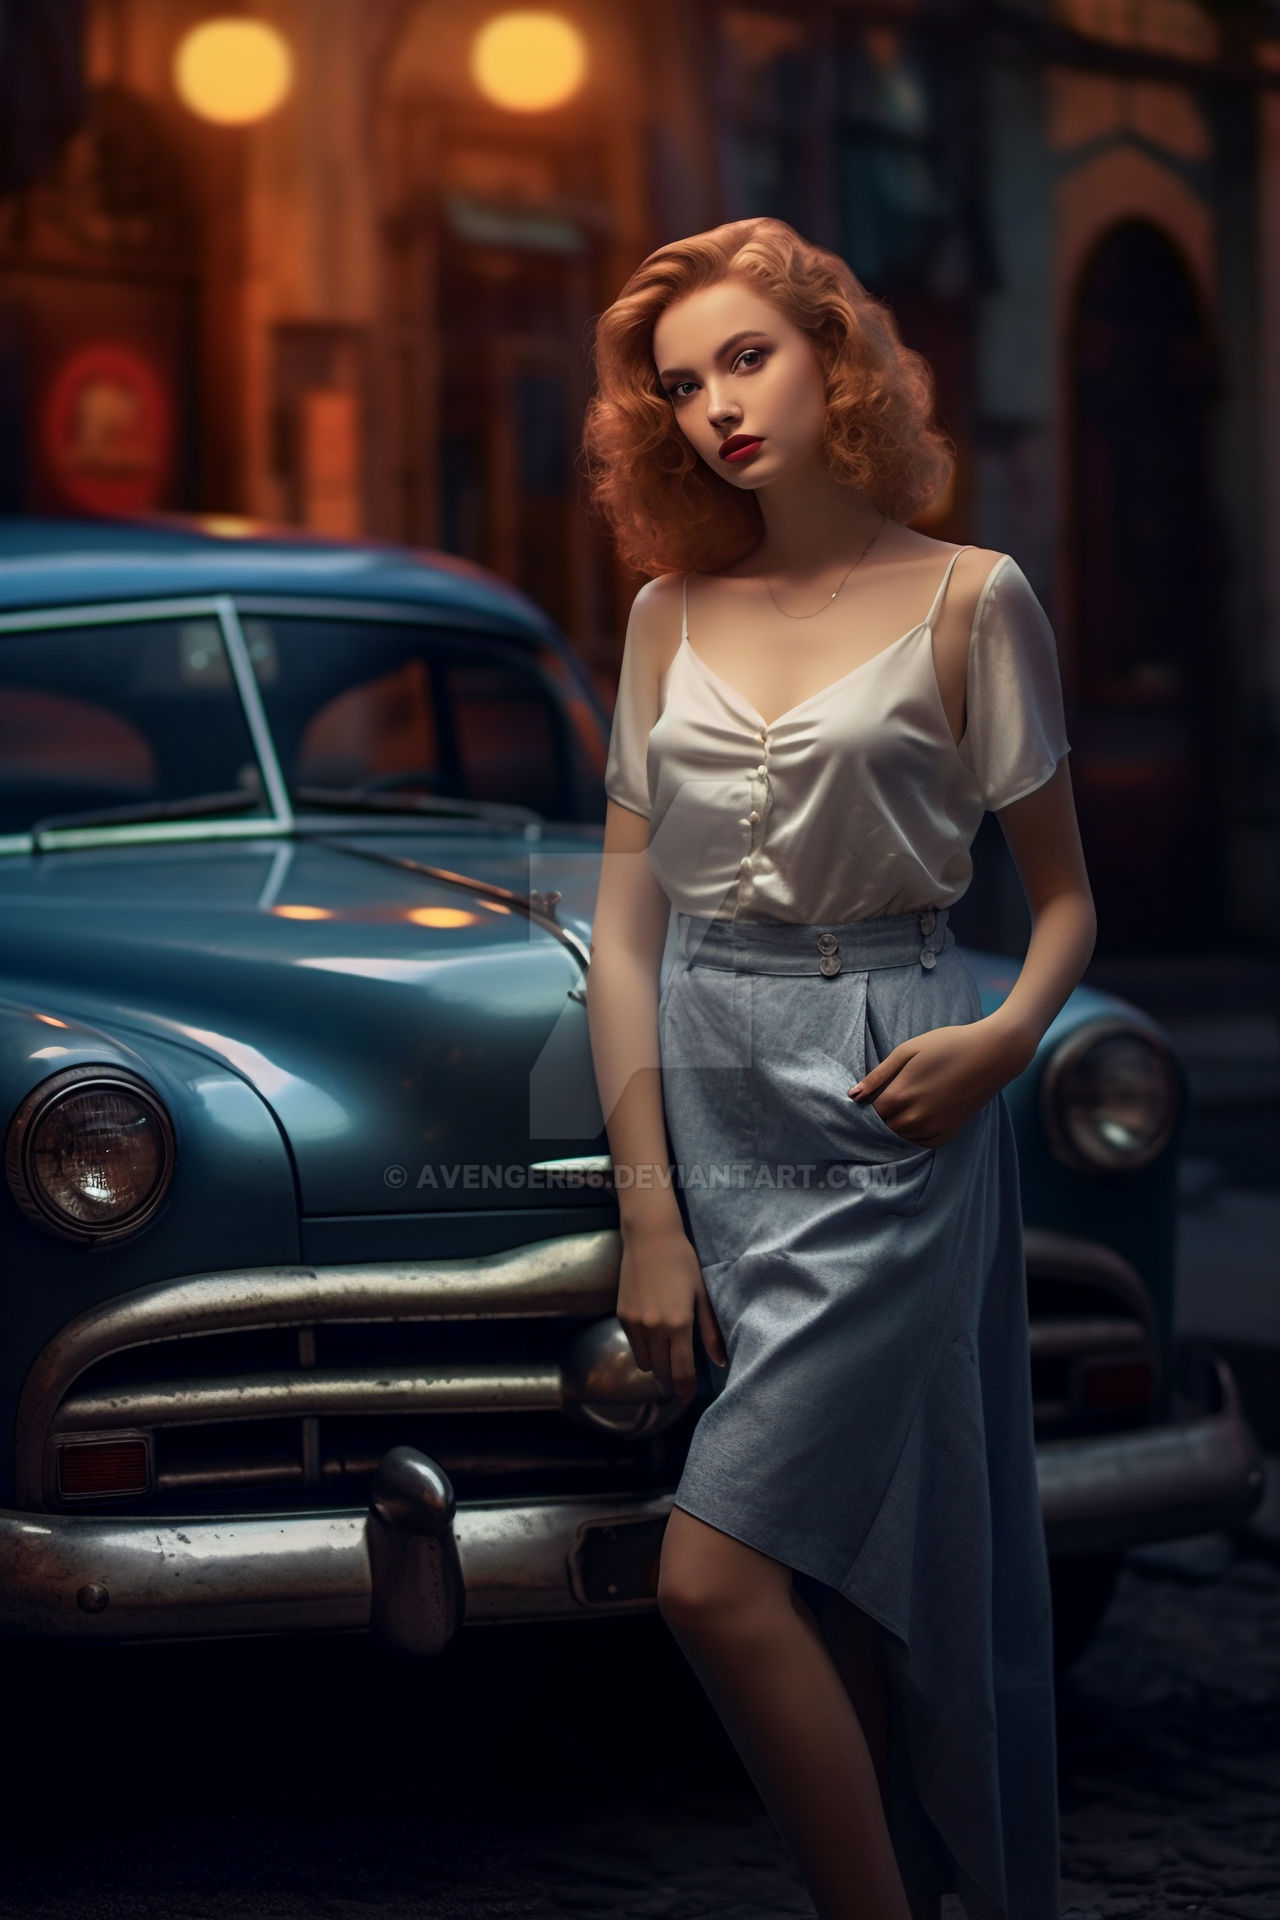 Girl and Old Car by AvengerB6 on DeviantArt